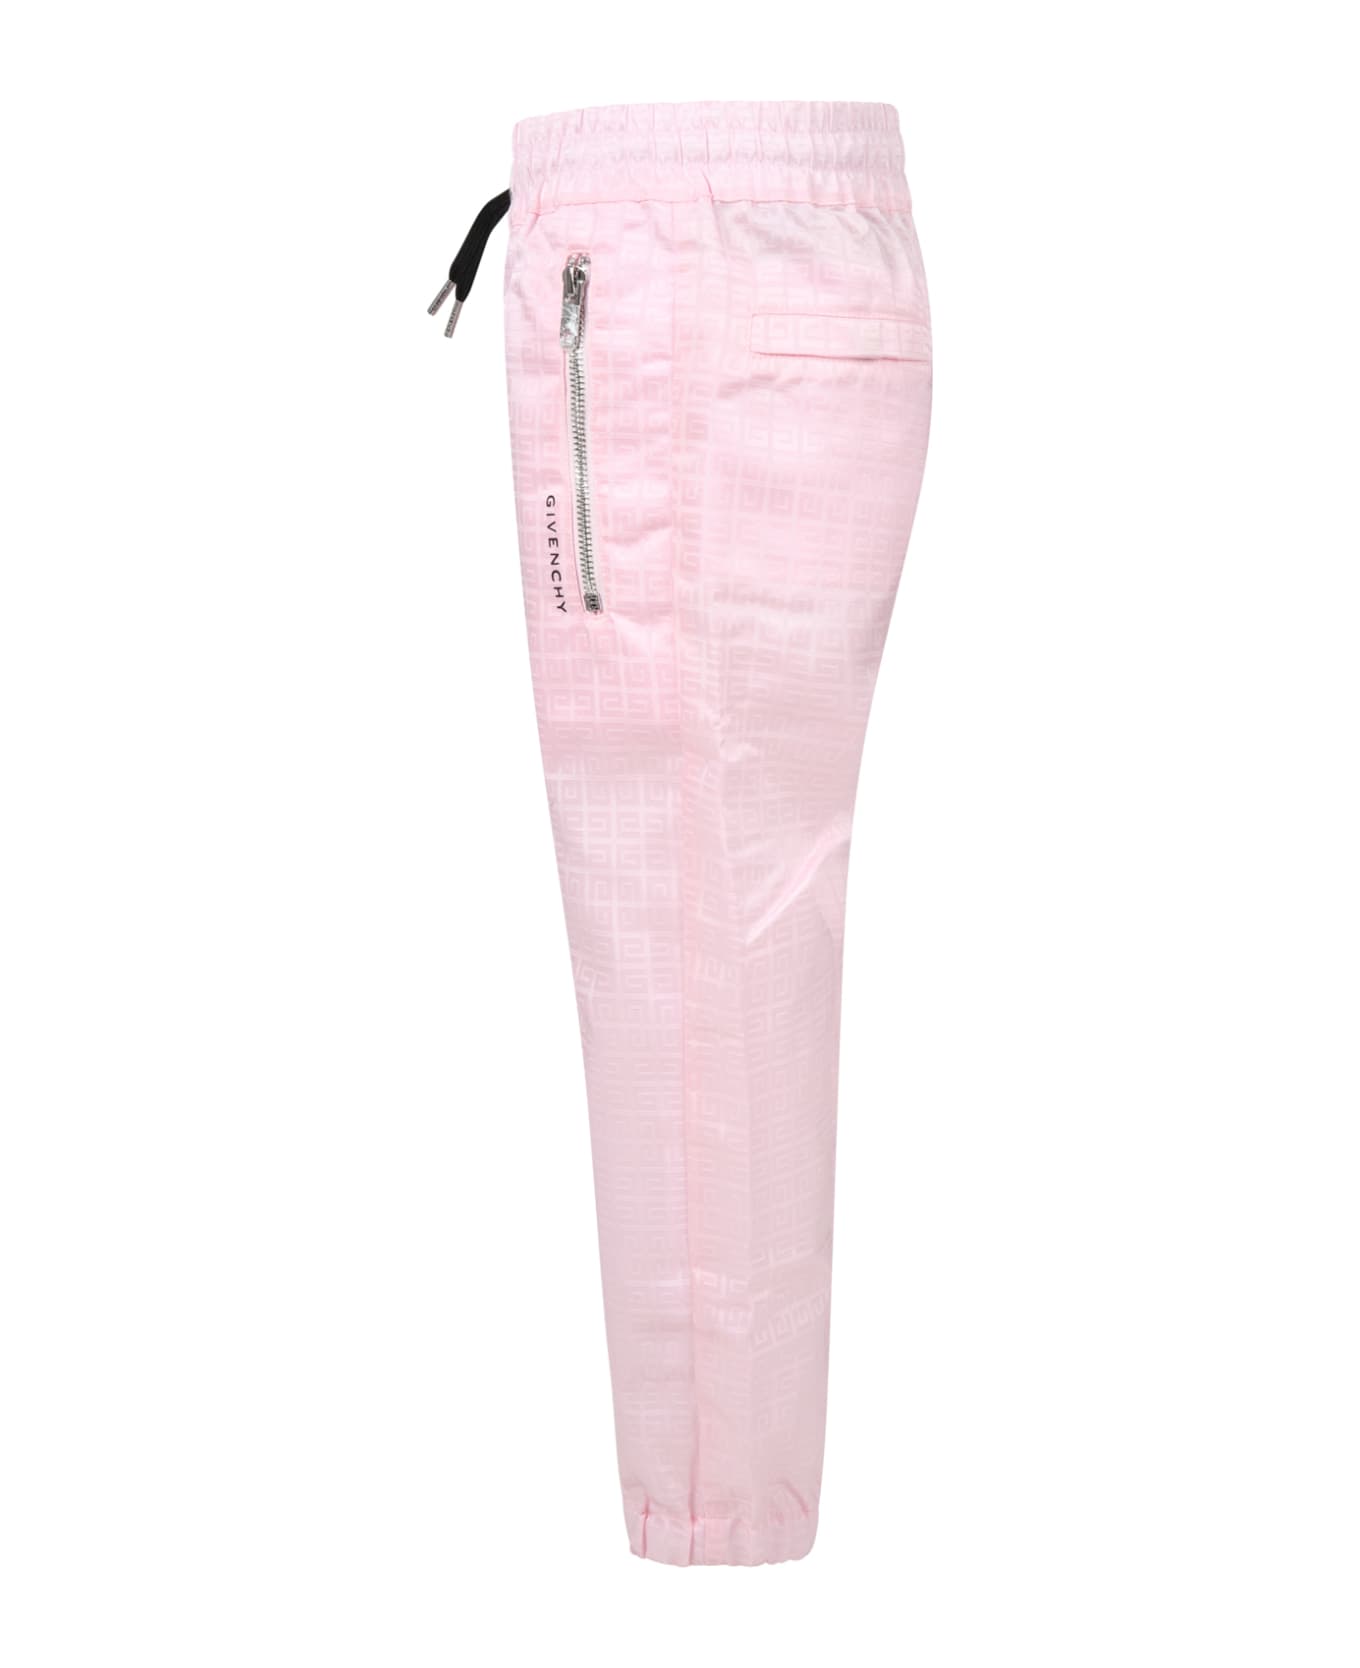 Givenchy Pink Trousers For Girl With Black Logo - Pink